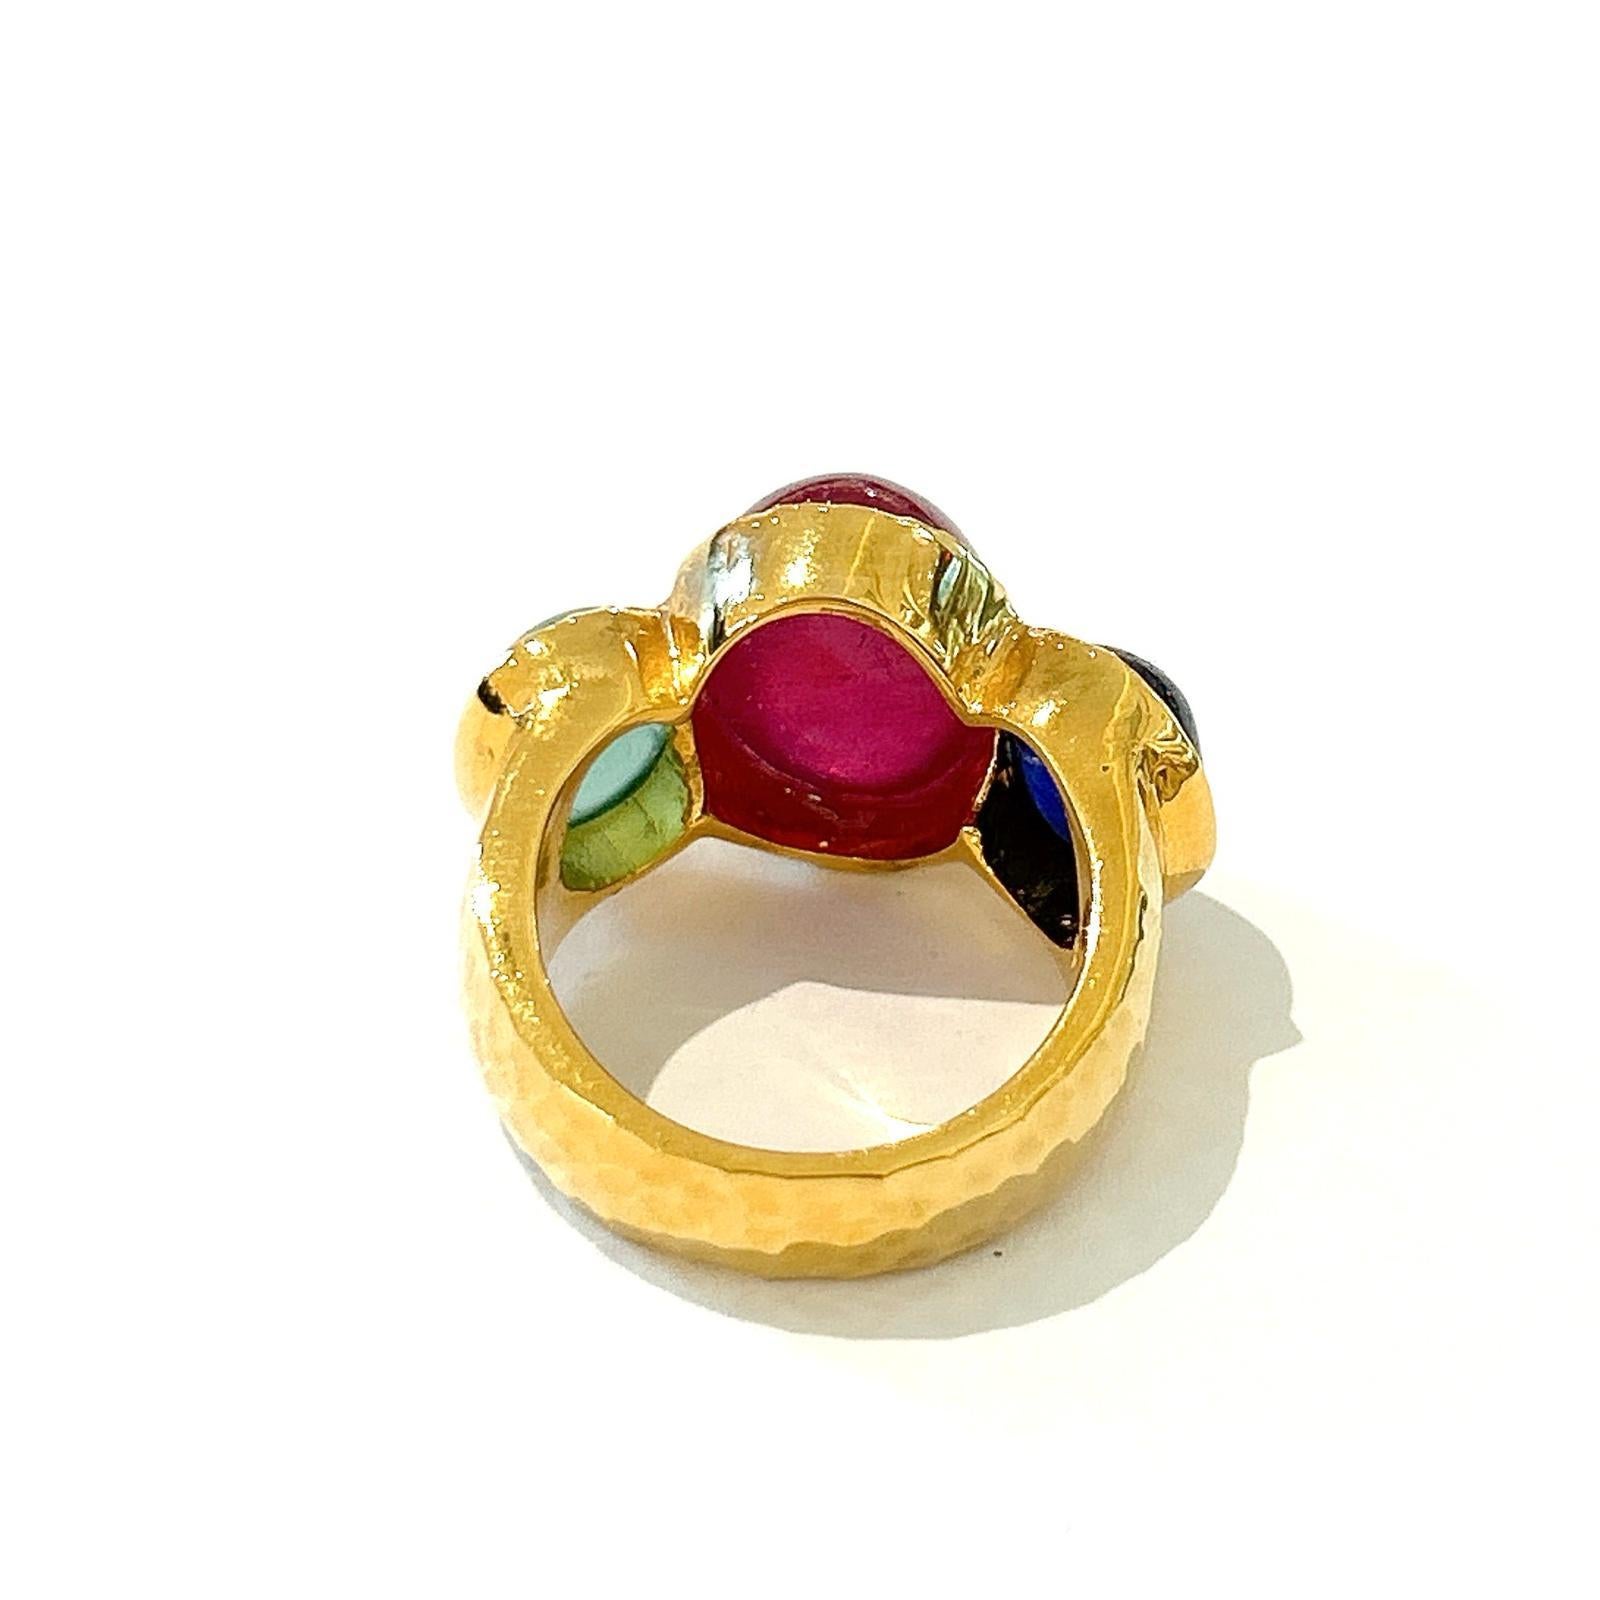 Bochic “Orient” Ruby, Emerald & Sapphire Vintage 3 Gem Ring Set 18K & Silver  In New Condition For Sale In New York, NY